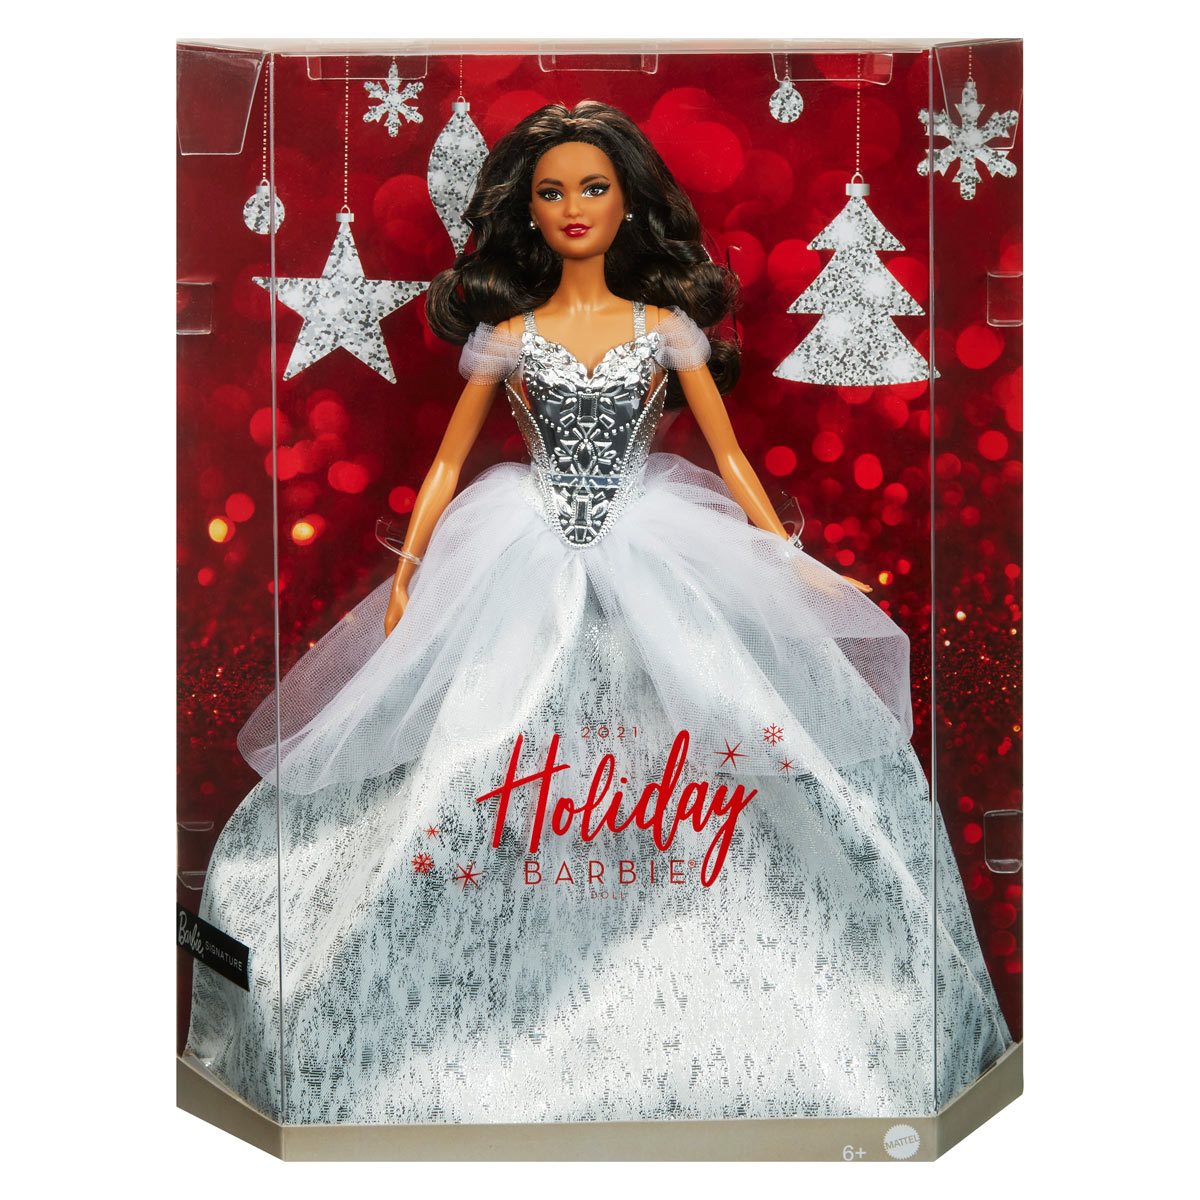 Hoopvol Uitstralen arm Barbie Holiday 2021 Doll - Entertainment Earth